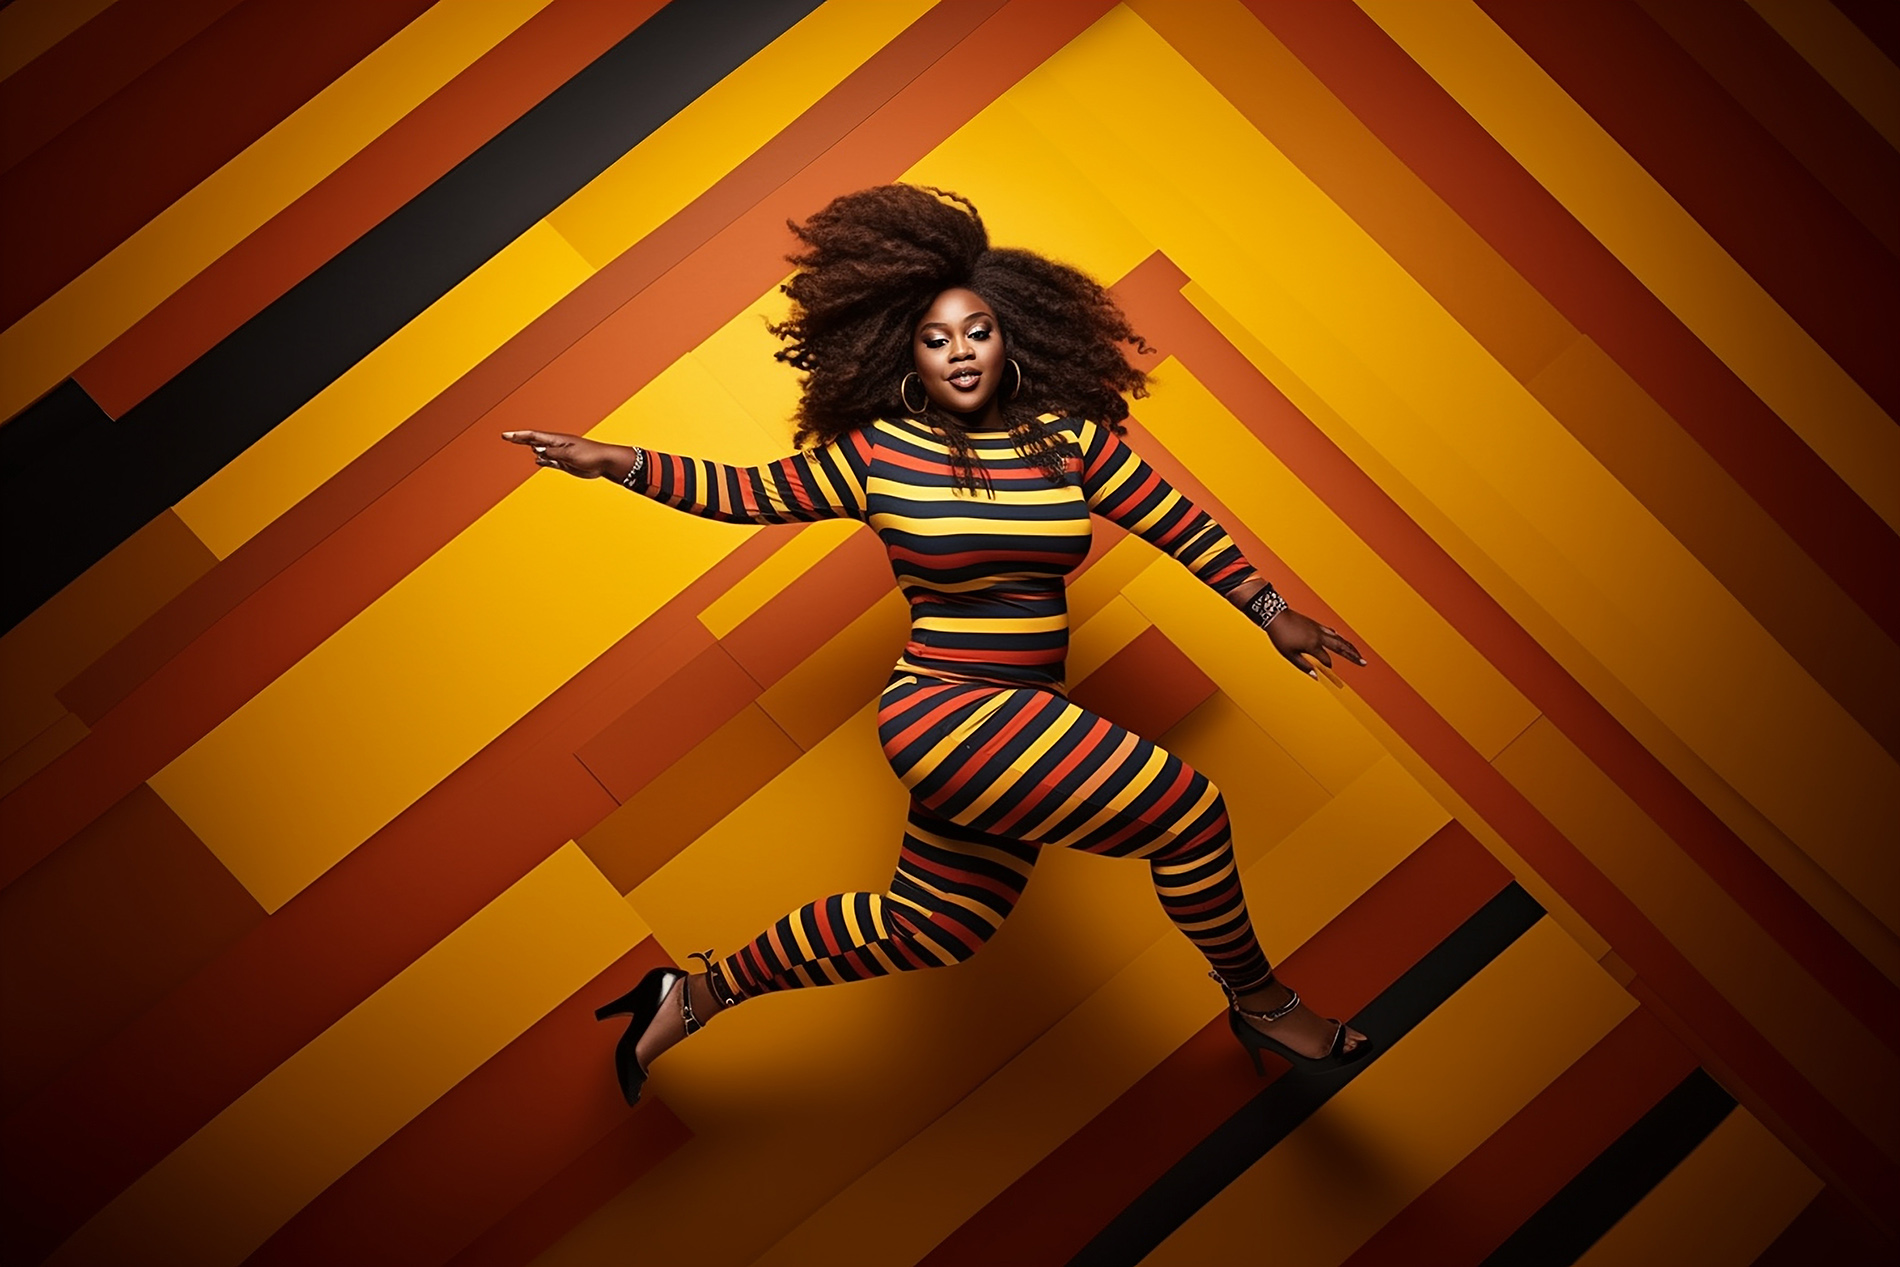 A dynamic image capturing a plus-size model in mid-air, joyfully jumping and posing. She wears a vibrant outfit that accentuates her figure, exuding confidence and happiness. The background is simple, ensuring the focus remains on her energy and the positive message of body diversity and self-expression